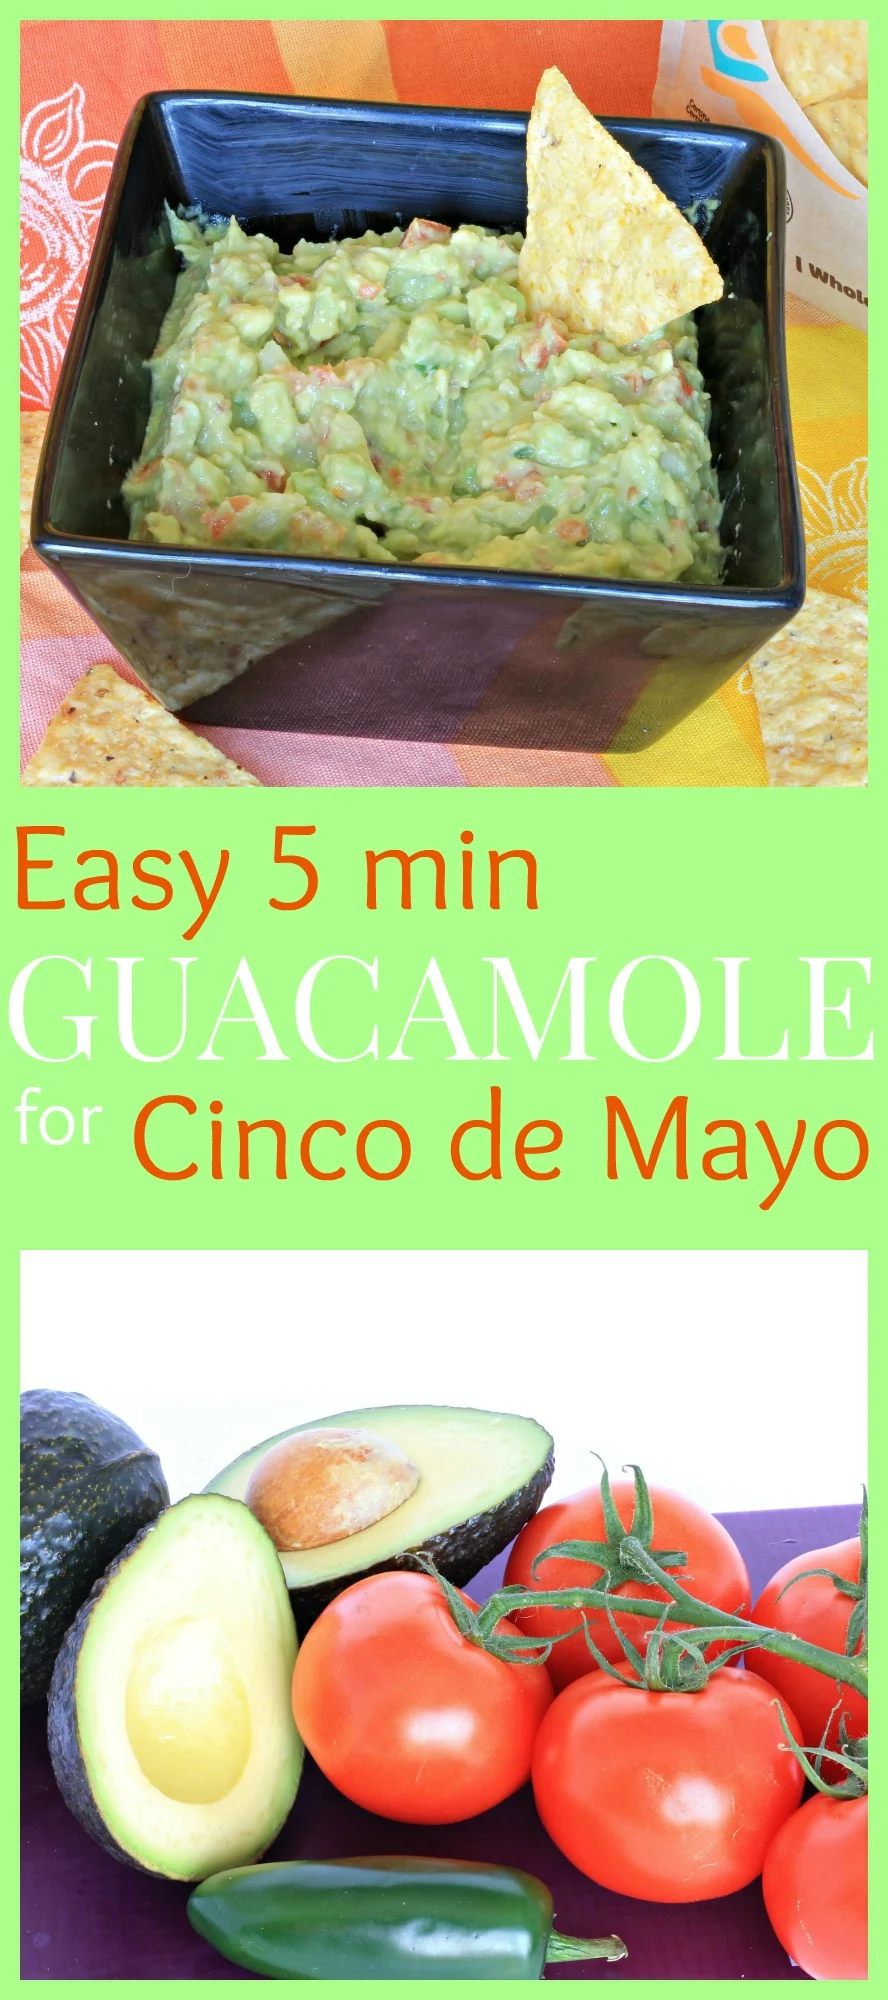 Easy Homemade Guacamole Recipe - comes together in 5 minutes and is perfect for your Cinco de Mayo celebrations or just a quick snack!